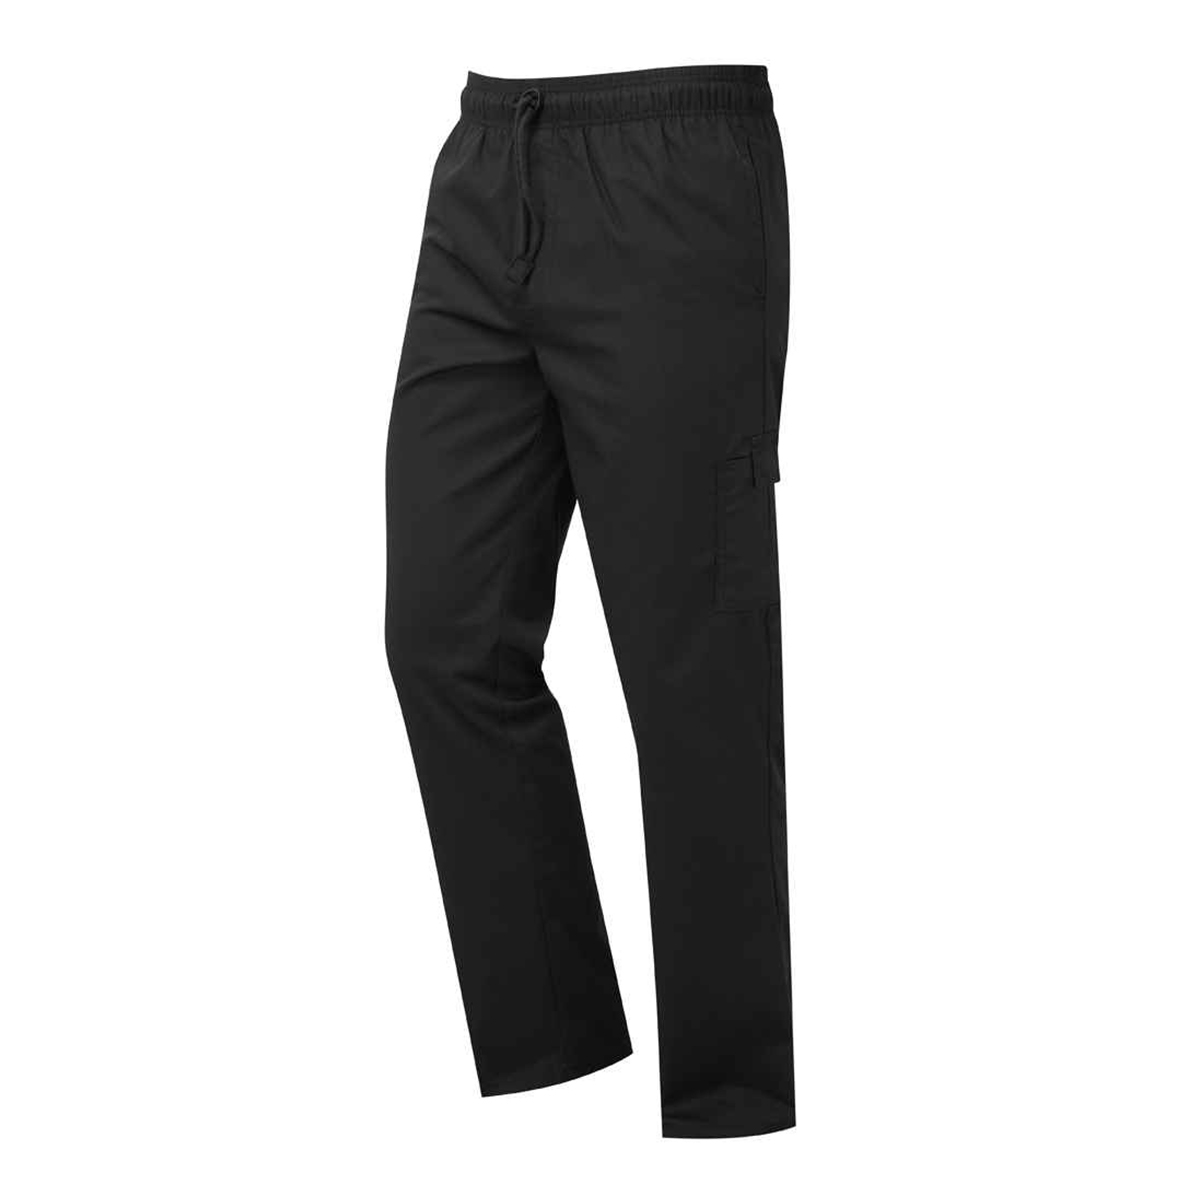 Chef Trousers Black